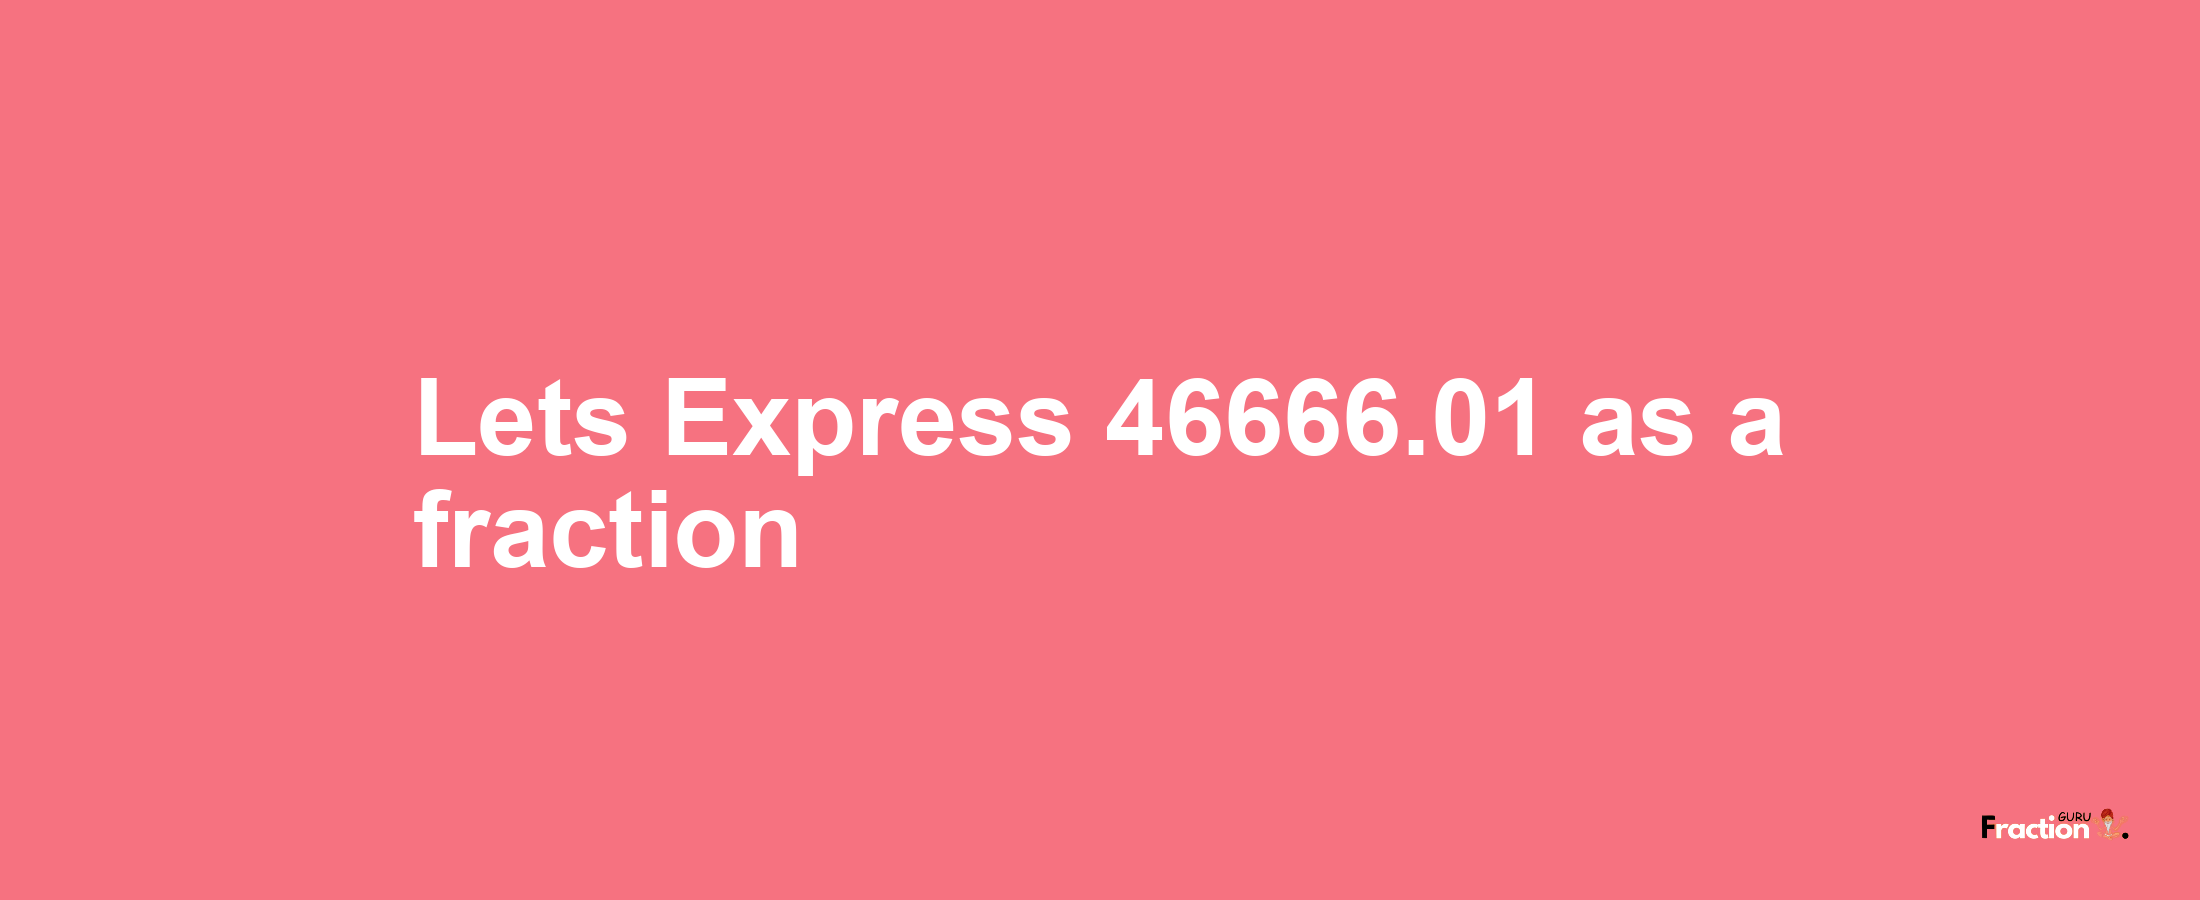 Lets Express 46666.01 as afraction